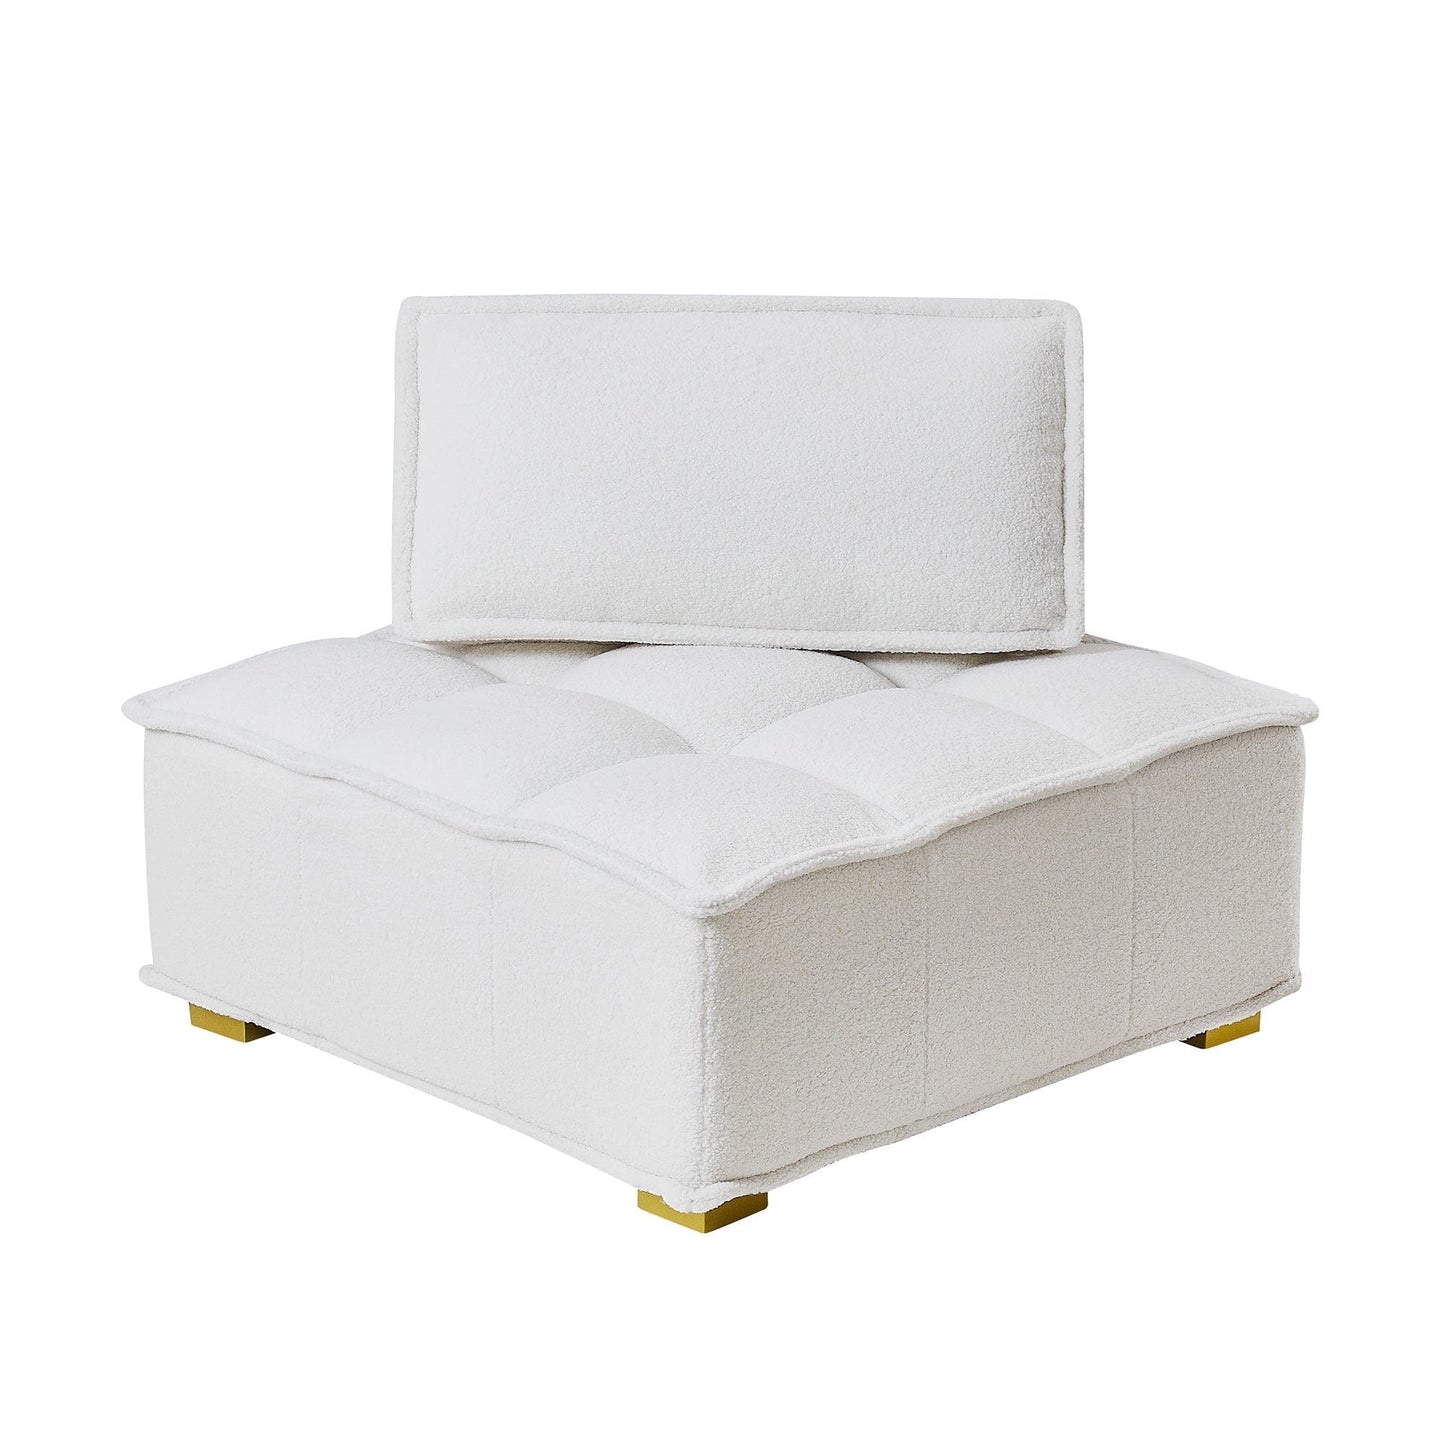 1st Choice Furniture Direct Sofa 1st Choice Sofa Ottoman with Gold Wooden Legs and Teddy Fabric (White)